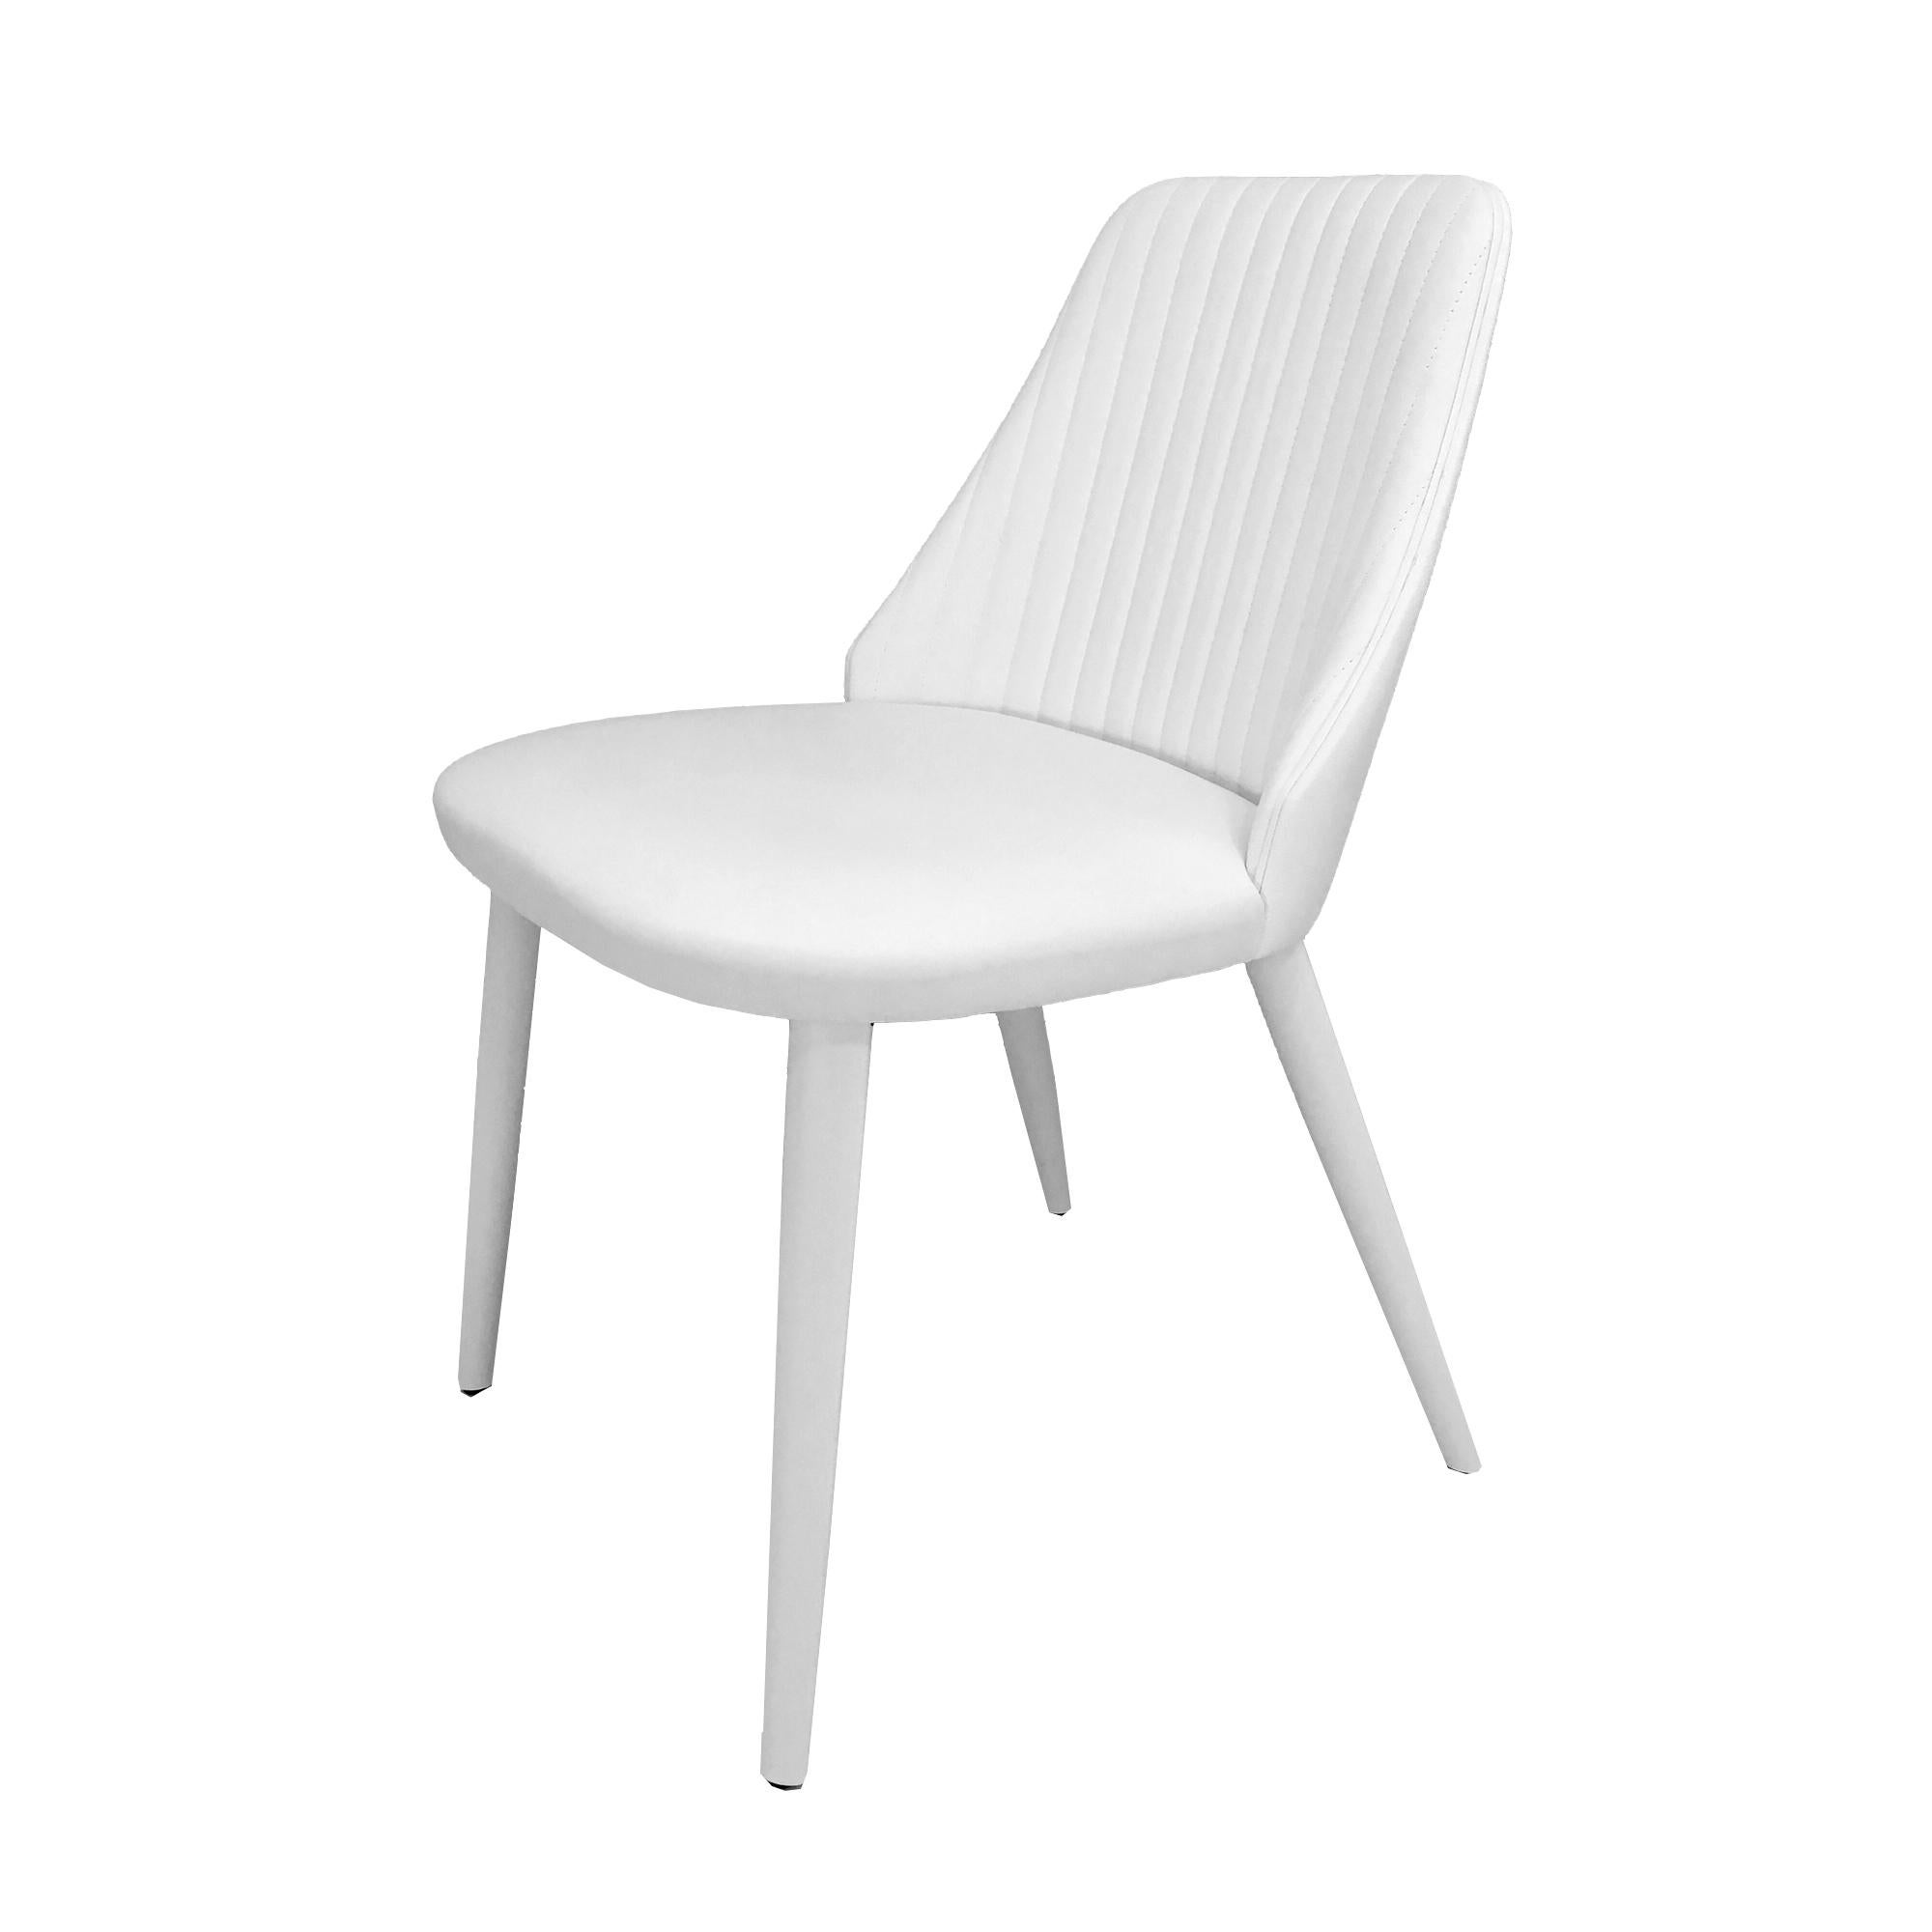 Italian In Stock in Los Angeles, Set of 4 White Leather Dining Chairs by Enzo Berti